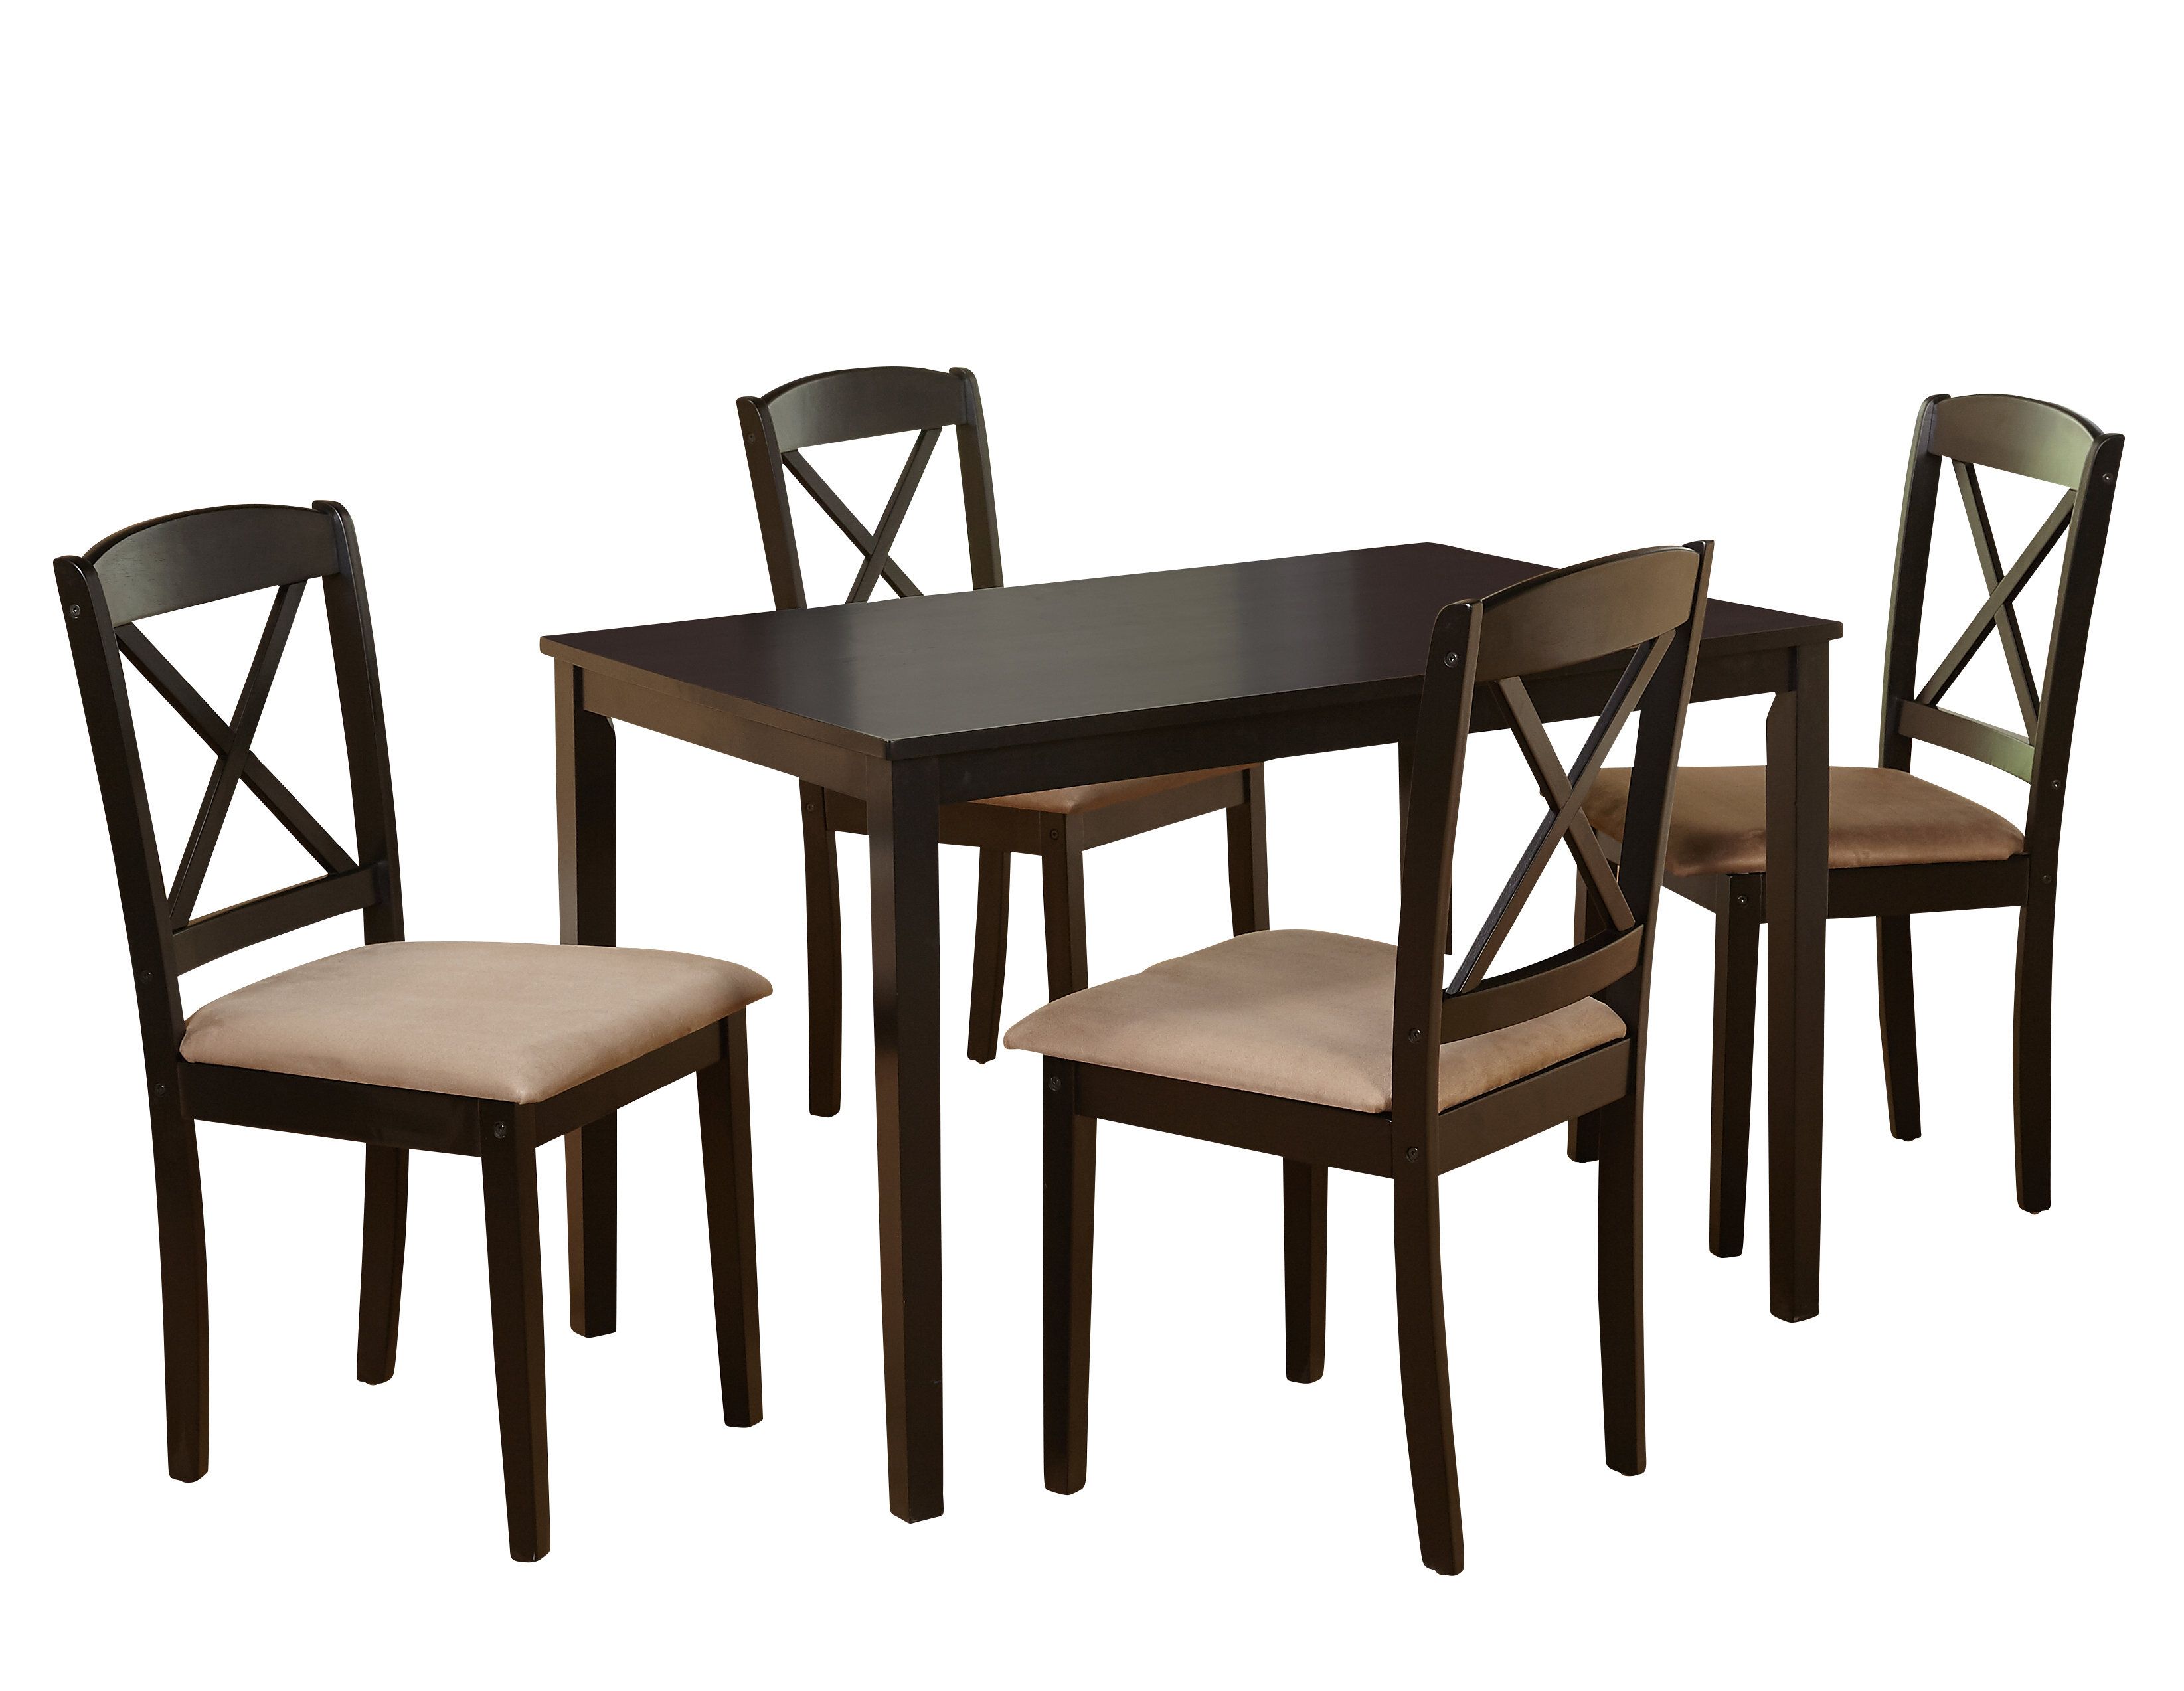 Scarlett 5 Piece Dining Set Pertaining To Most Up To Date Noyes 5 Piece Dining Sets (View 16 of 20)